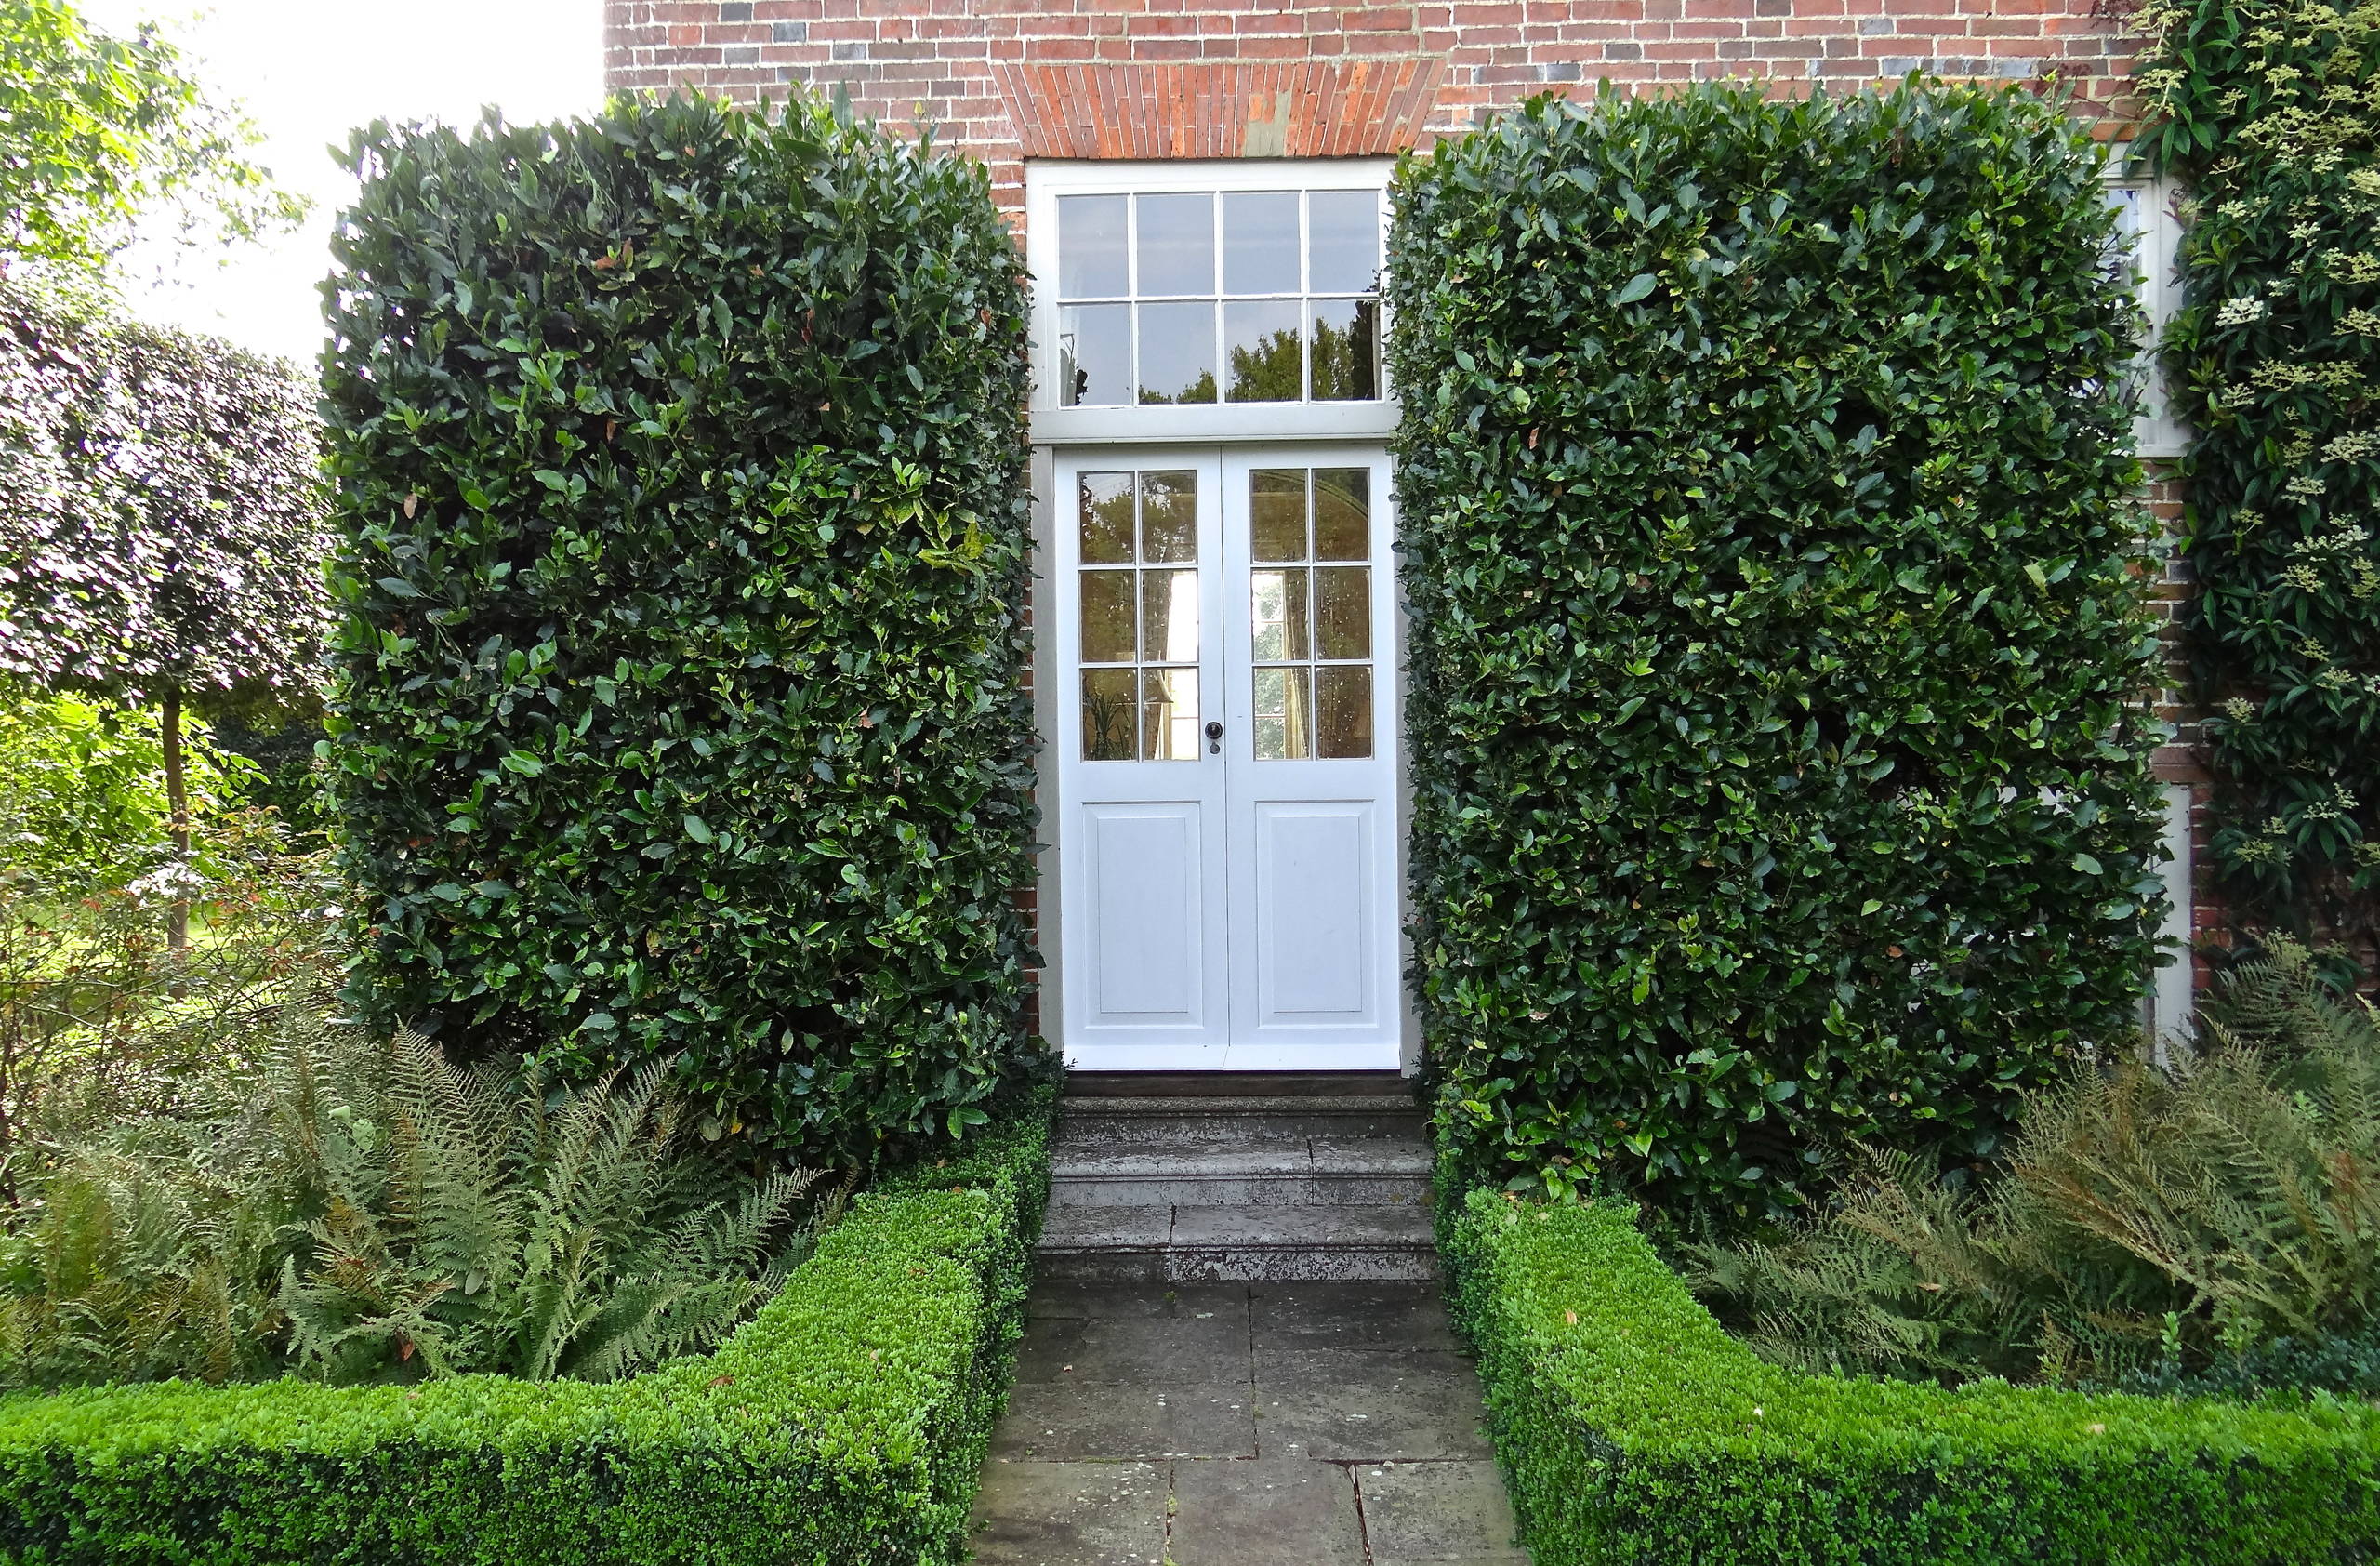 How to Choose a Climbing Plant for Your Front Door   Houzz UK